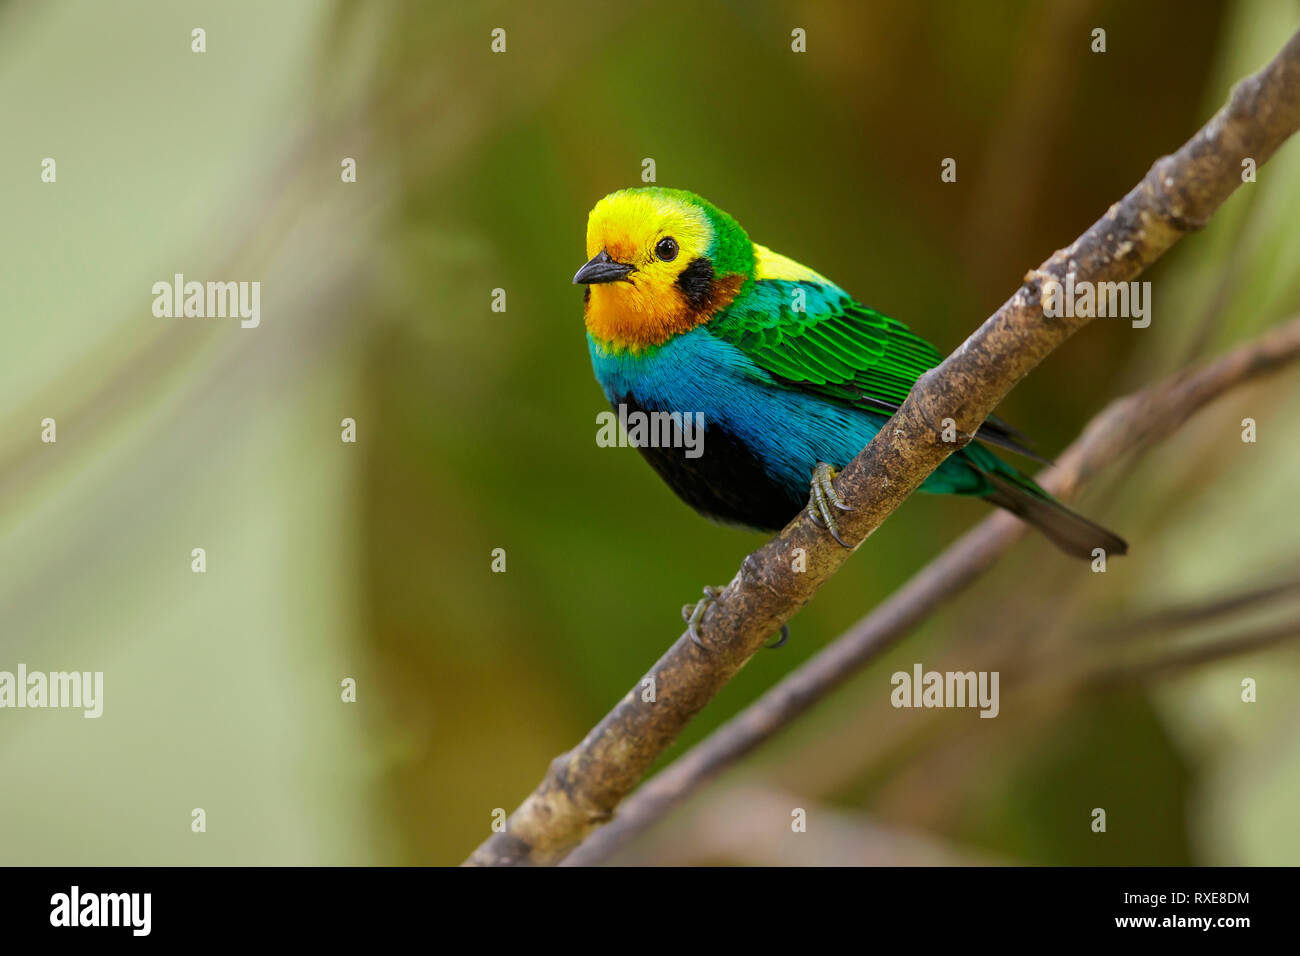 Multicolored Tanager (Chlorochrysa nitidissima) perched on a branch in the Andes mountains of Colombia. Stock Photo